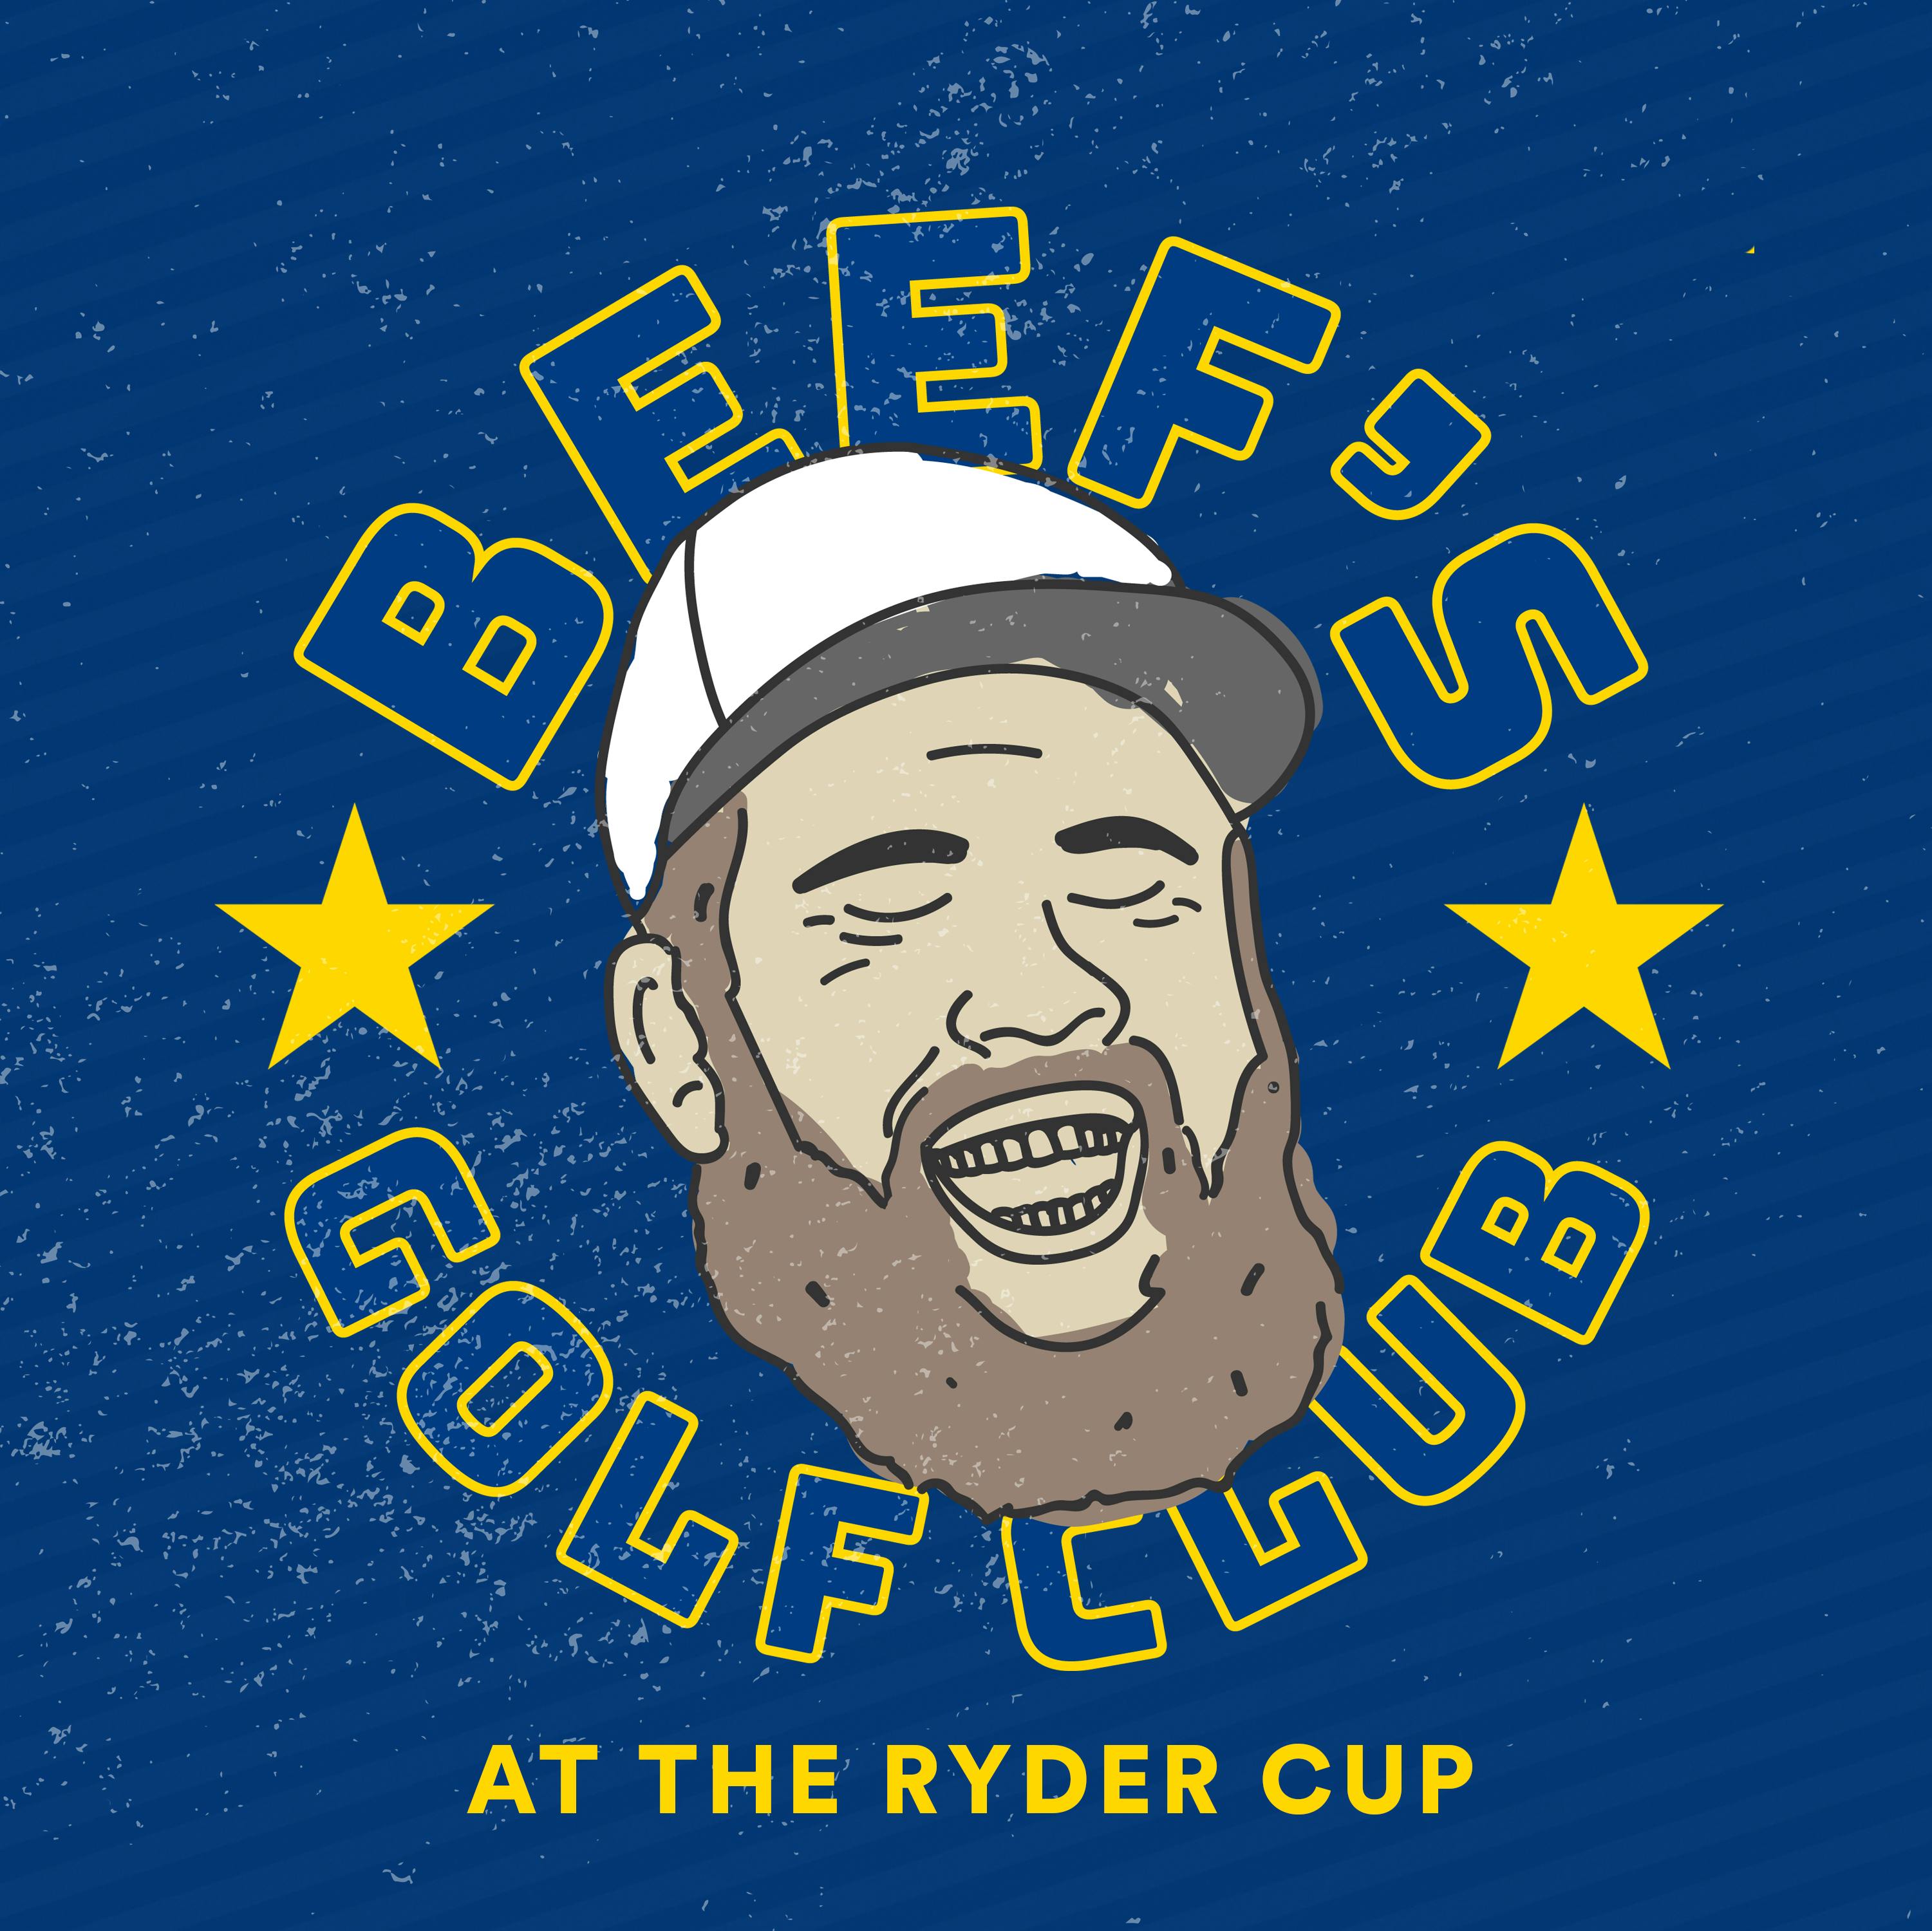 Ryder Cup: Rory and Cantlay DRAMA on and off the course, but Europe on the brink of victory ft. Peter Finch